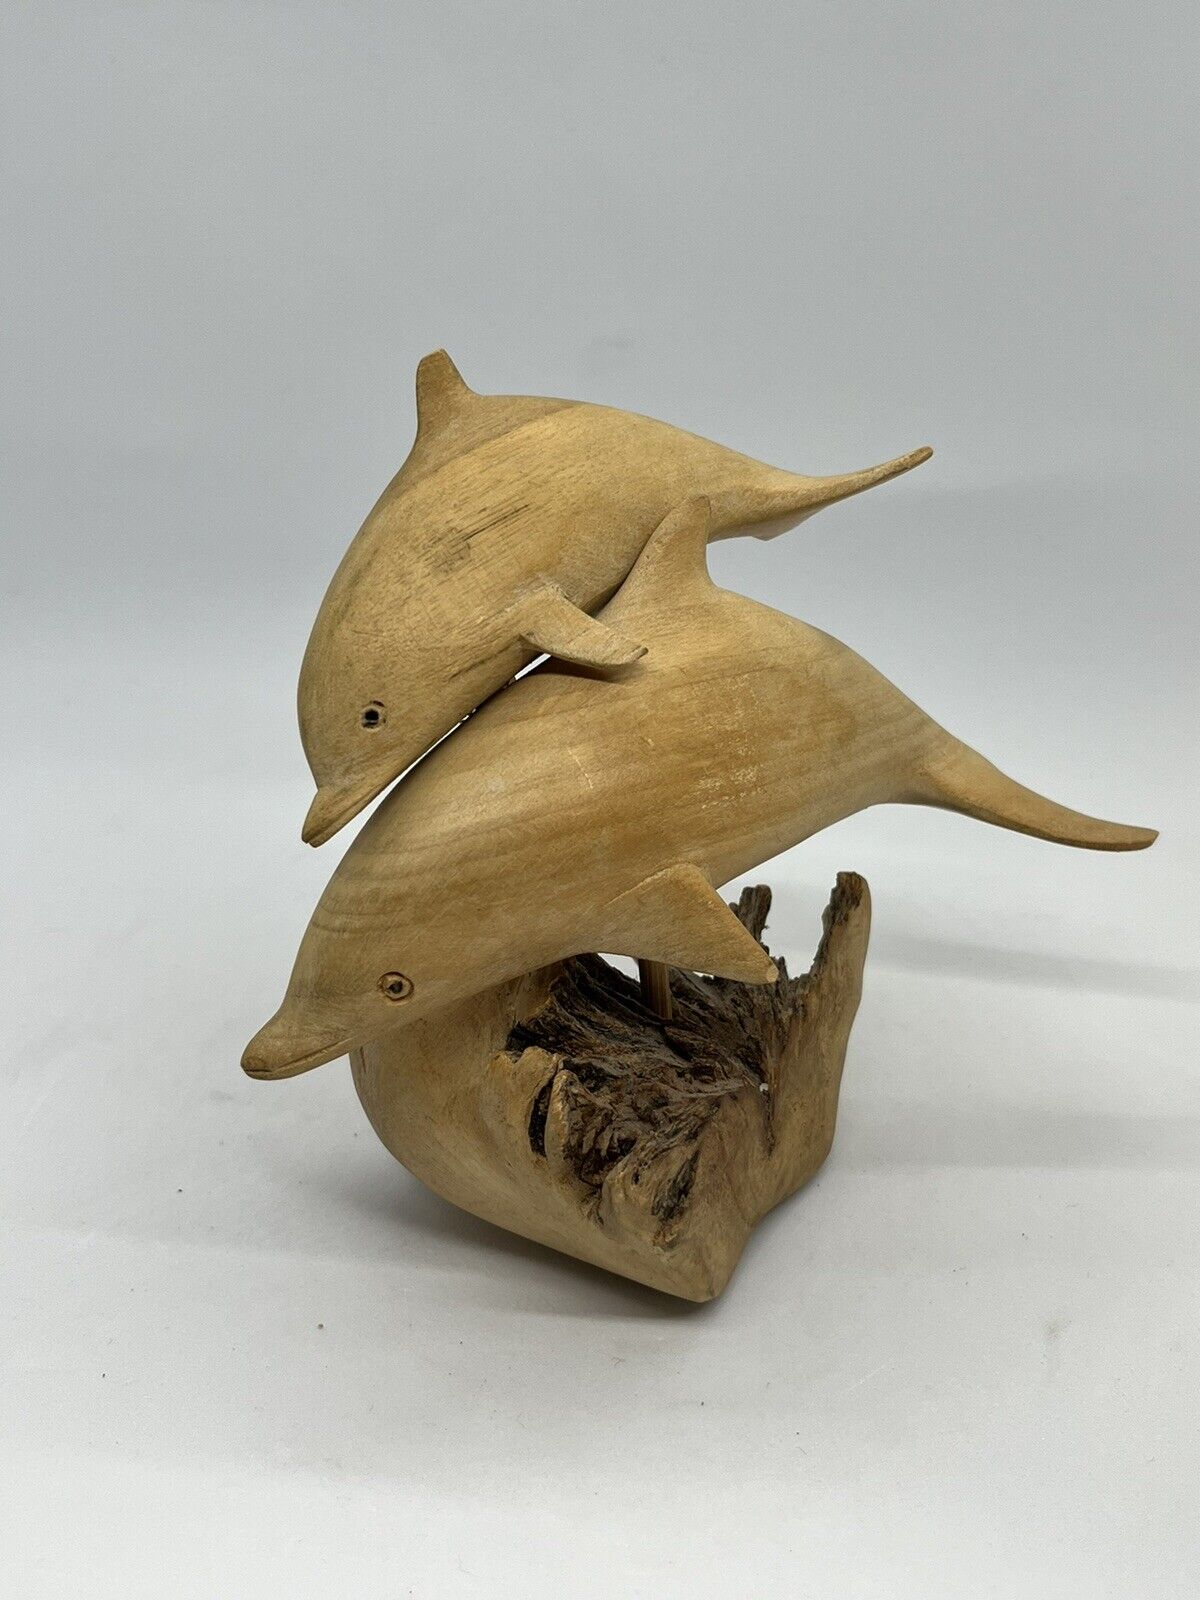 Unique Hand Carved 2 Dolphins On Parasite Wood w/Base Figurine Carving